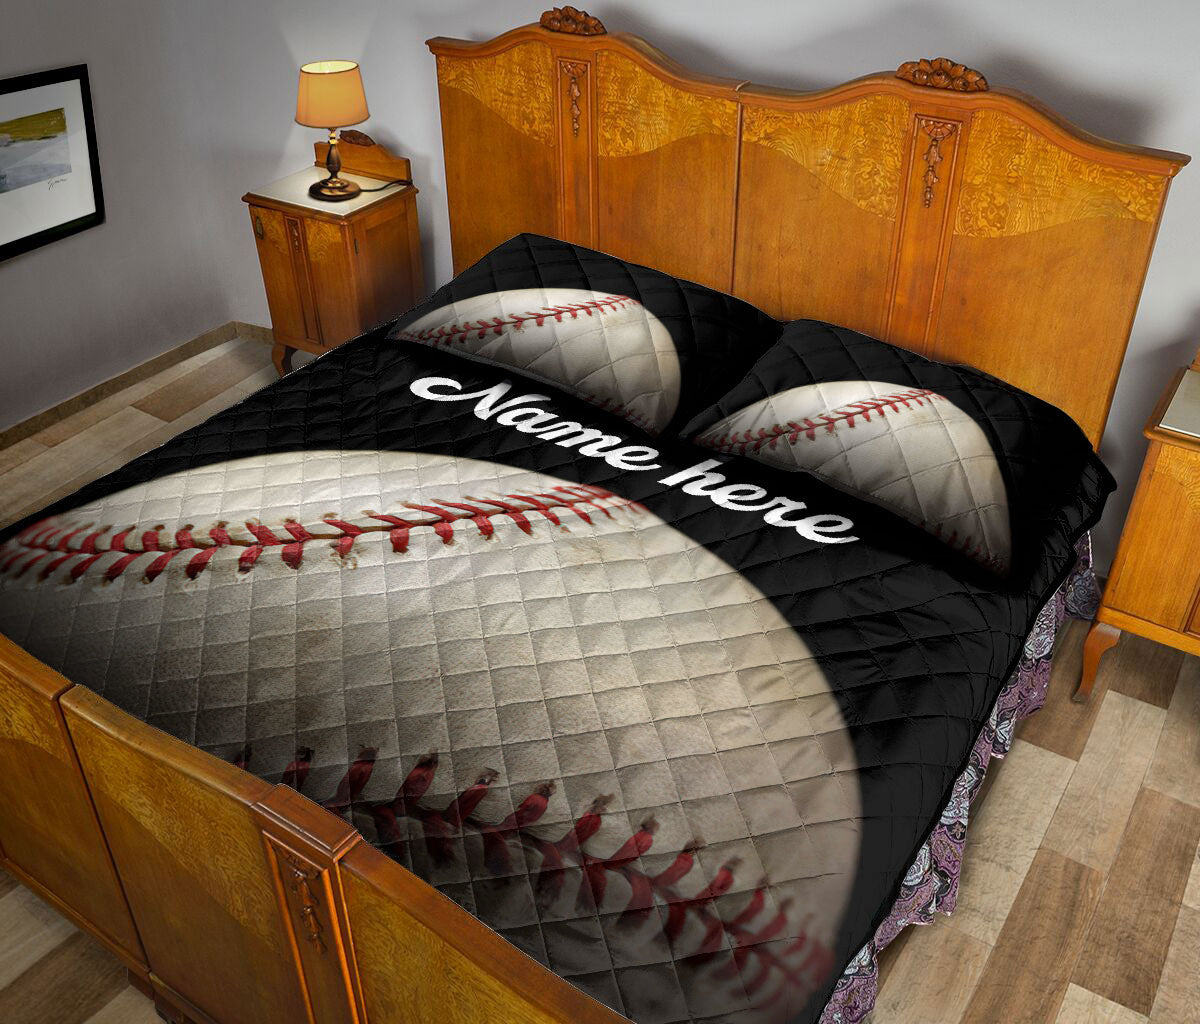 Ohaprints-Quilt-Bed-Set-Pillowcase-Baseball-Ball-Black-Background-Sports-Lover-Gift-Custom-Personalized-Name-Blanket-Bedspread-Bedding-1158-King (90'' x 100'')